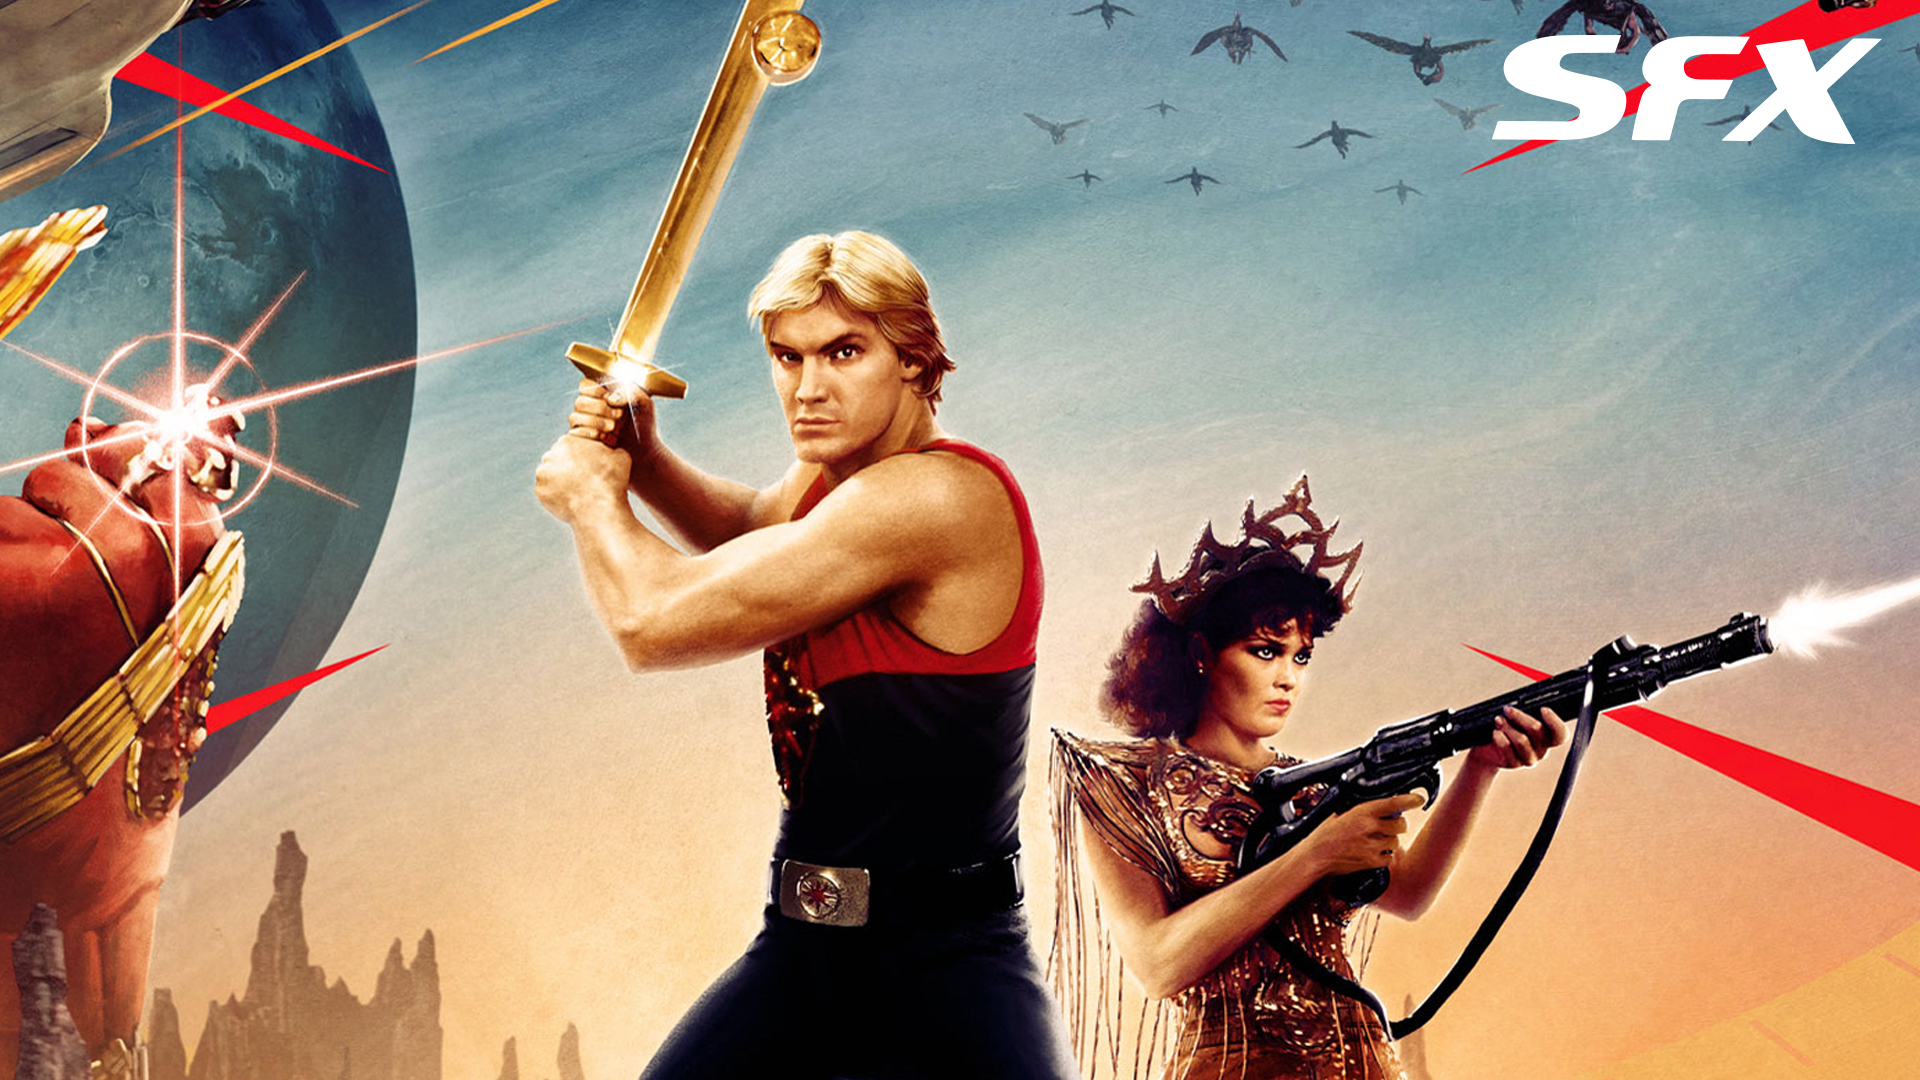 Flash Gordon at 40: An oral history of the epic space opera